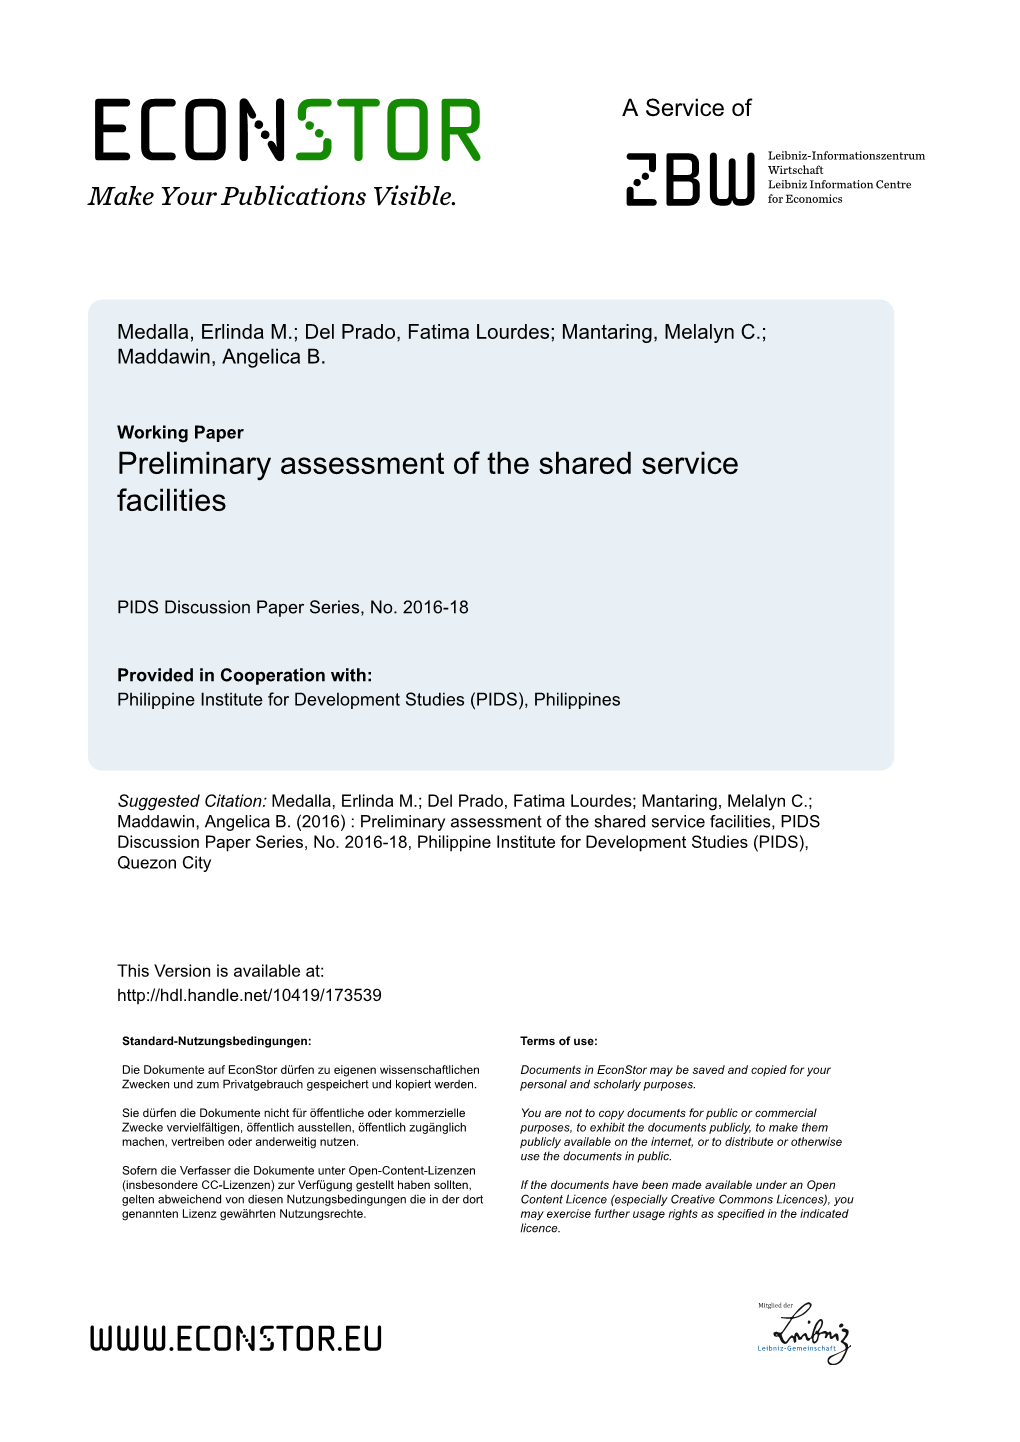 Preliminary Assessment of the Shared Service Facilities